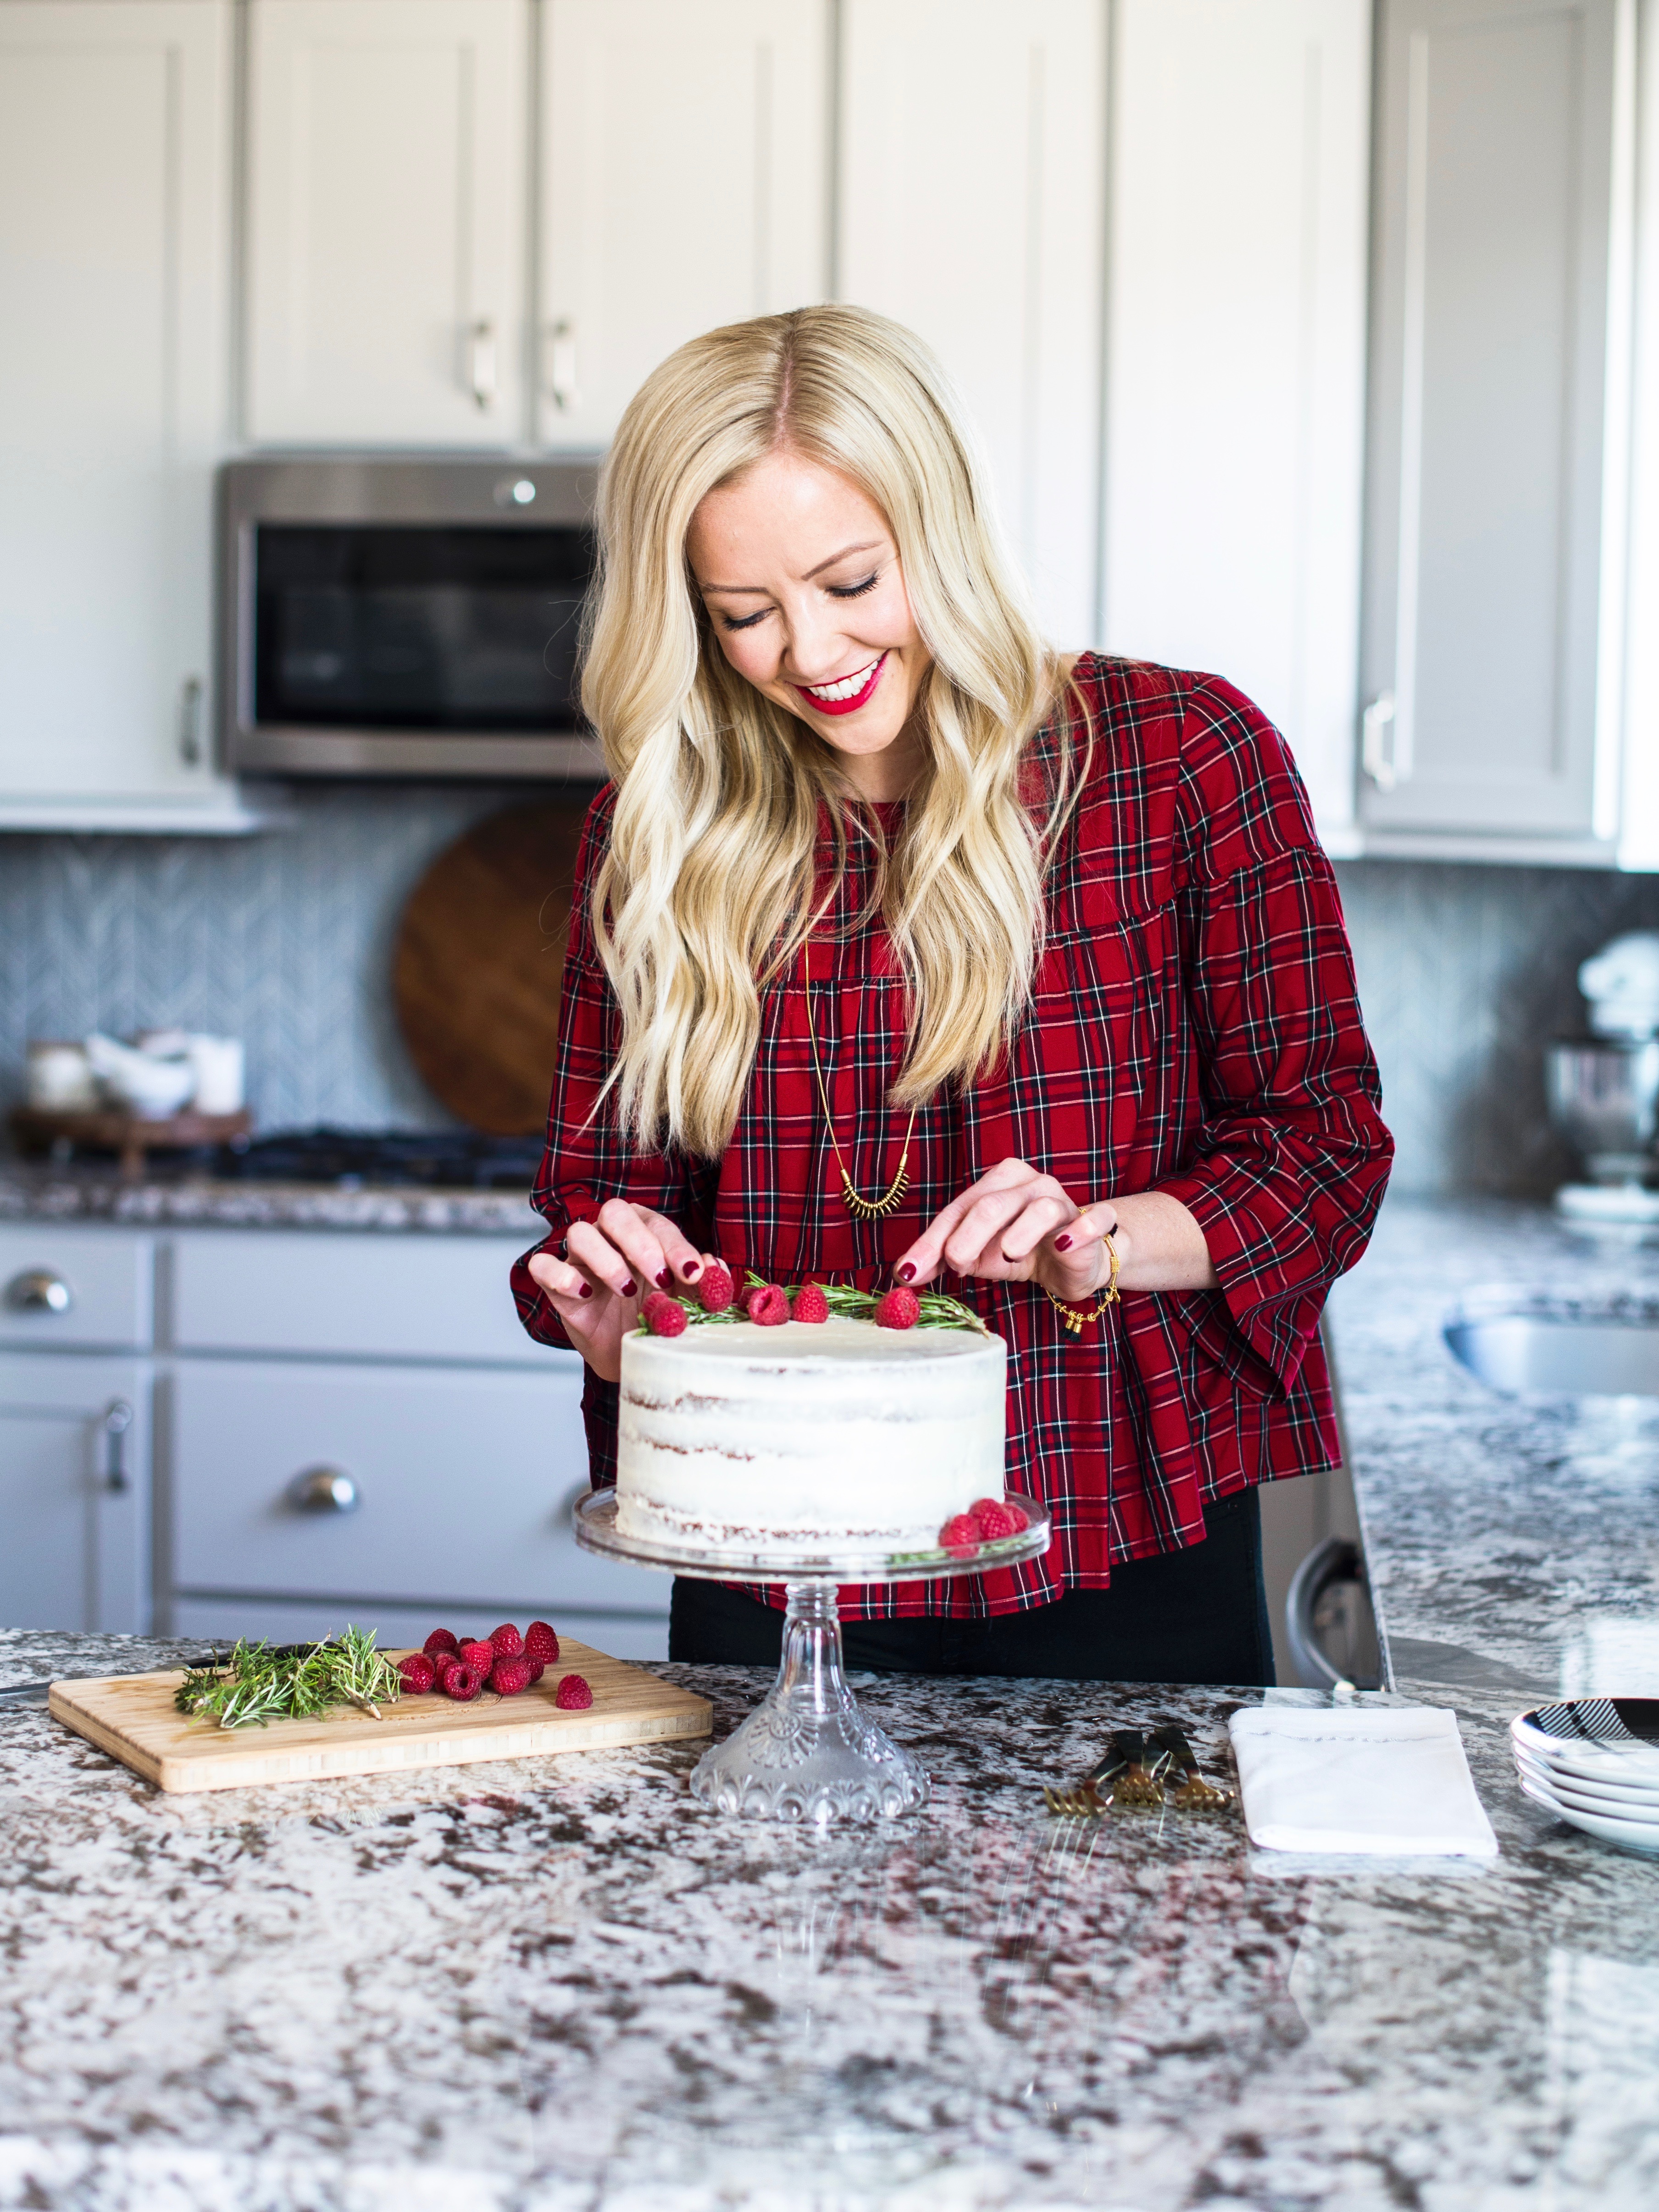 10 Cakes Perfect for the Holidays: So many cakes! So little time! Have you decided which flavor (or flavors) you'll be making for your holiday party? To help you decide, I've narrowed it down to 10 cakes perfect for the holidays that will wow the crowds and bring joy to your table! #cakebycourtney #christmascakes #christmas #easychristmascakes